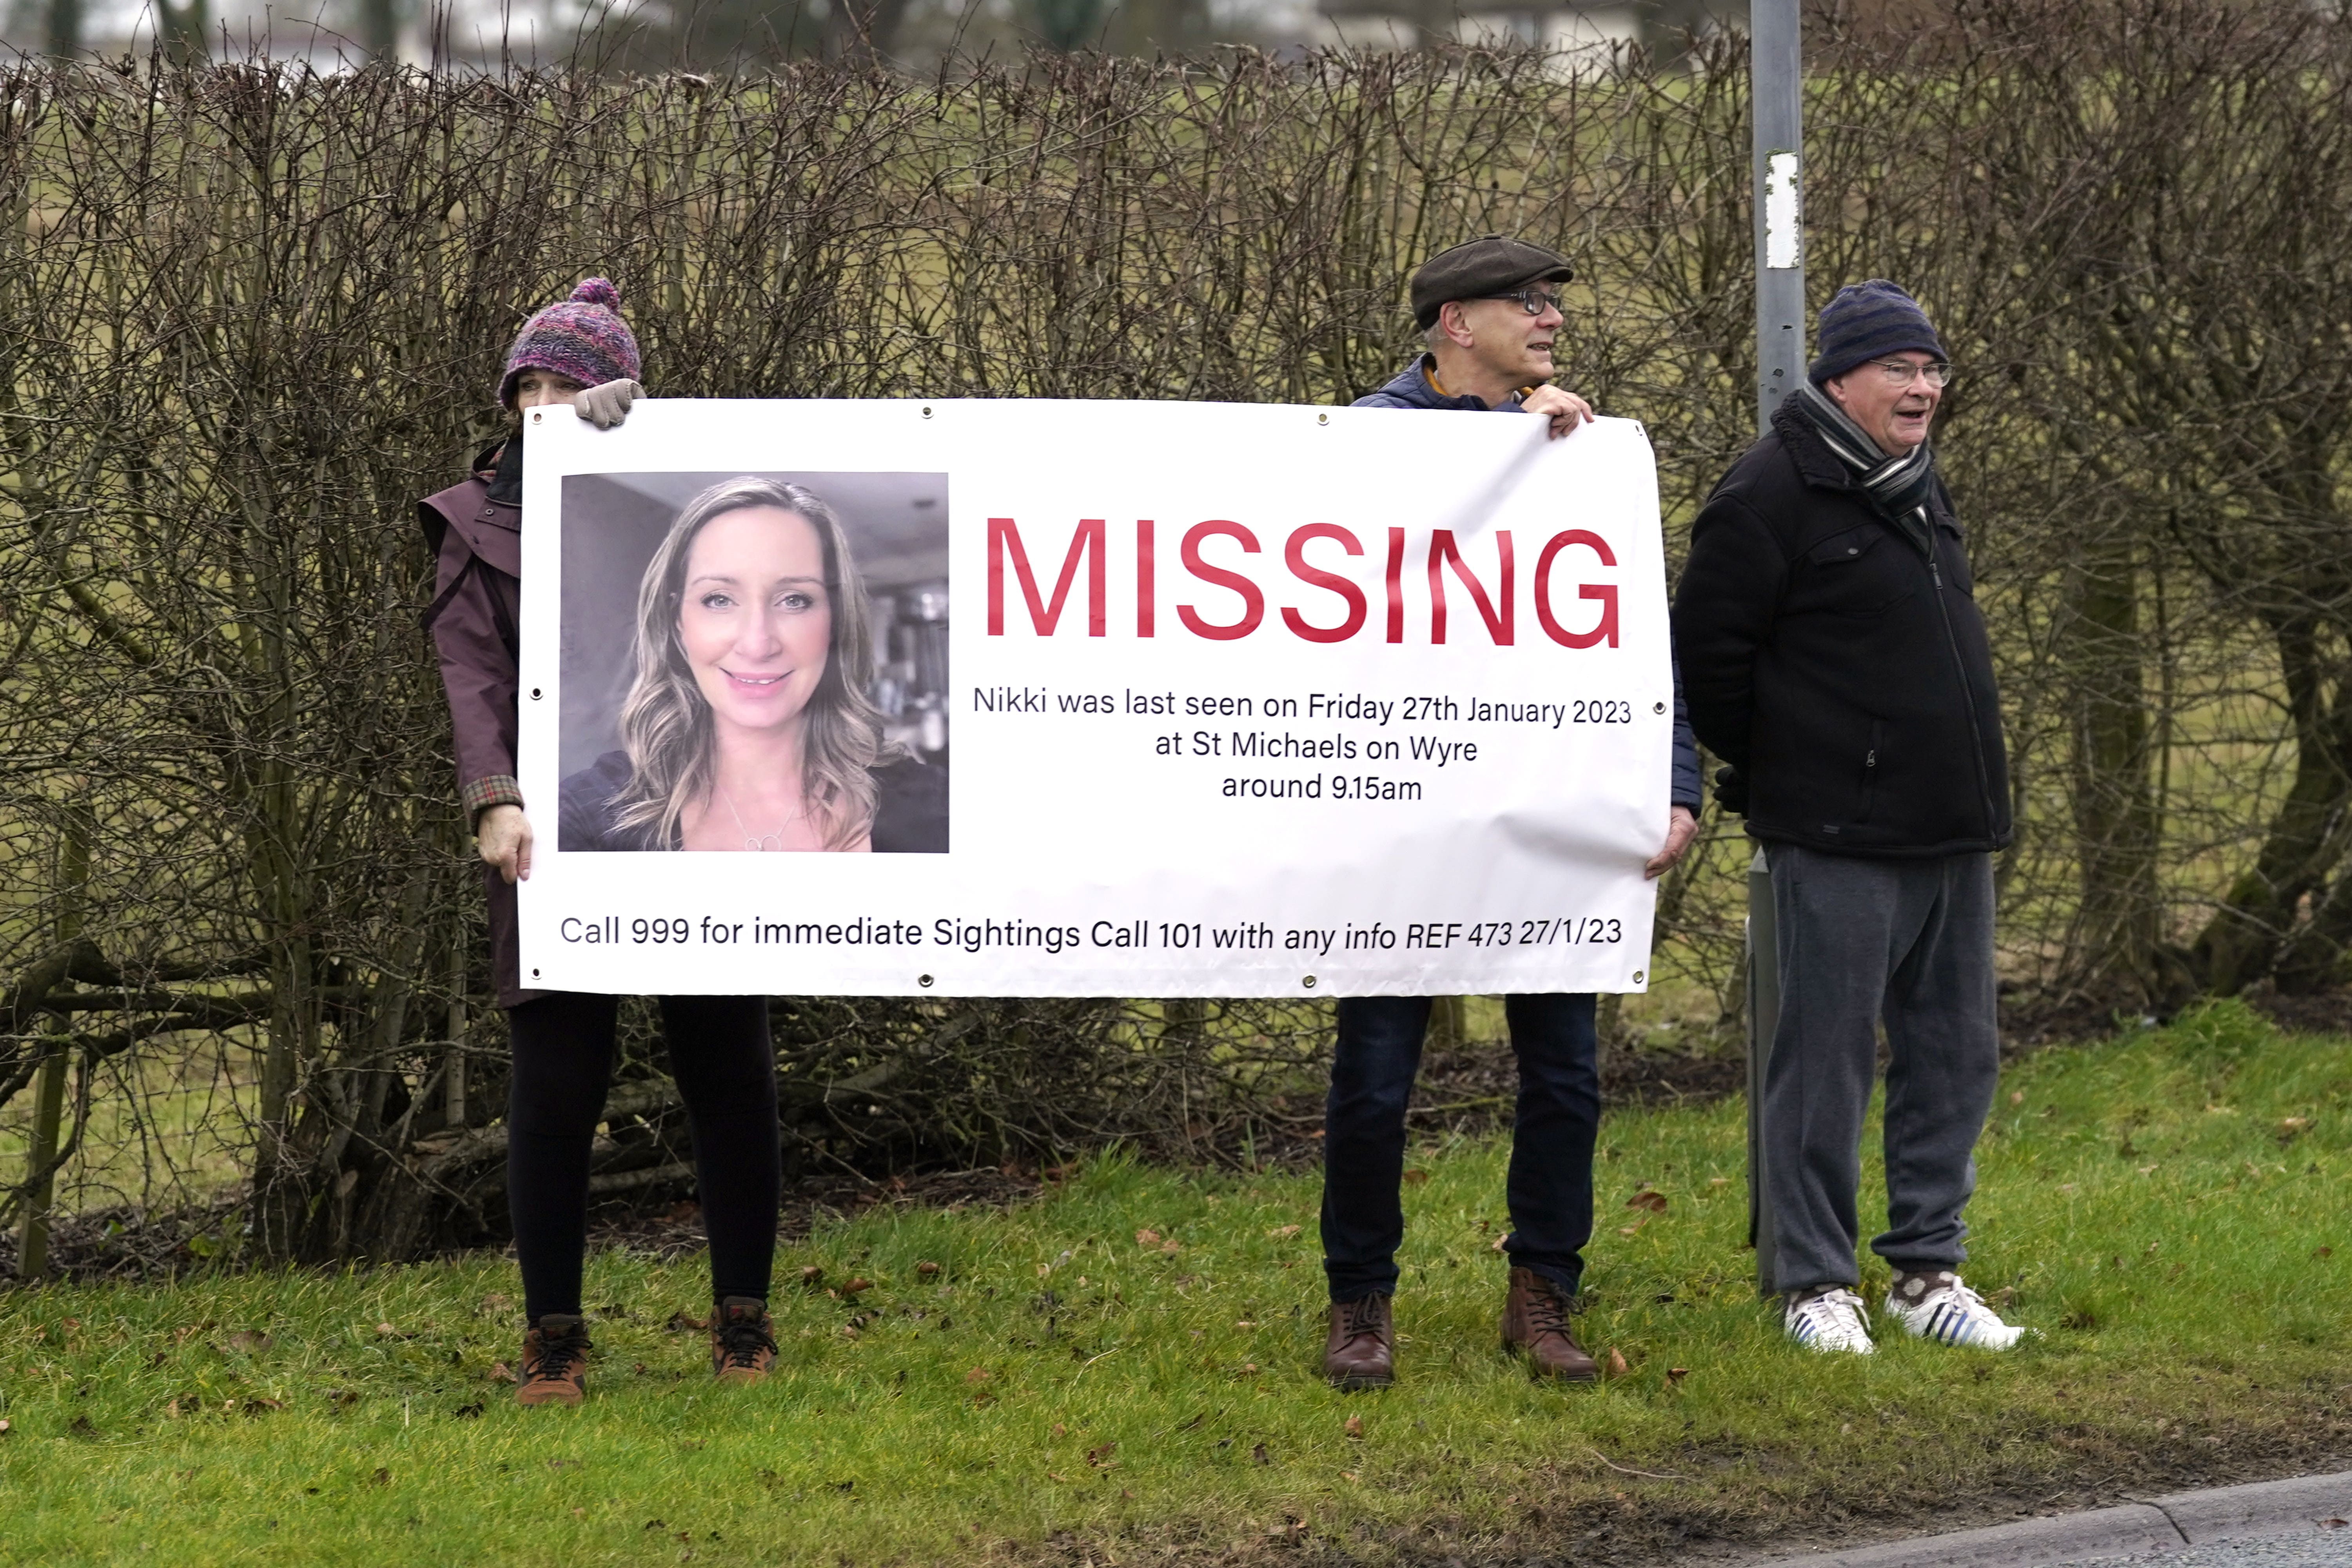 Members of the public line the road into St Michael’s on Wyre, Lancashire, with missing posters of Nicola Bulley (Danny Lawson/PA)